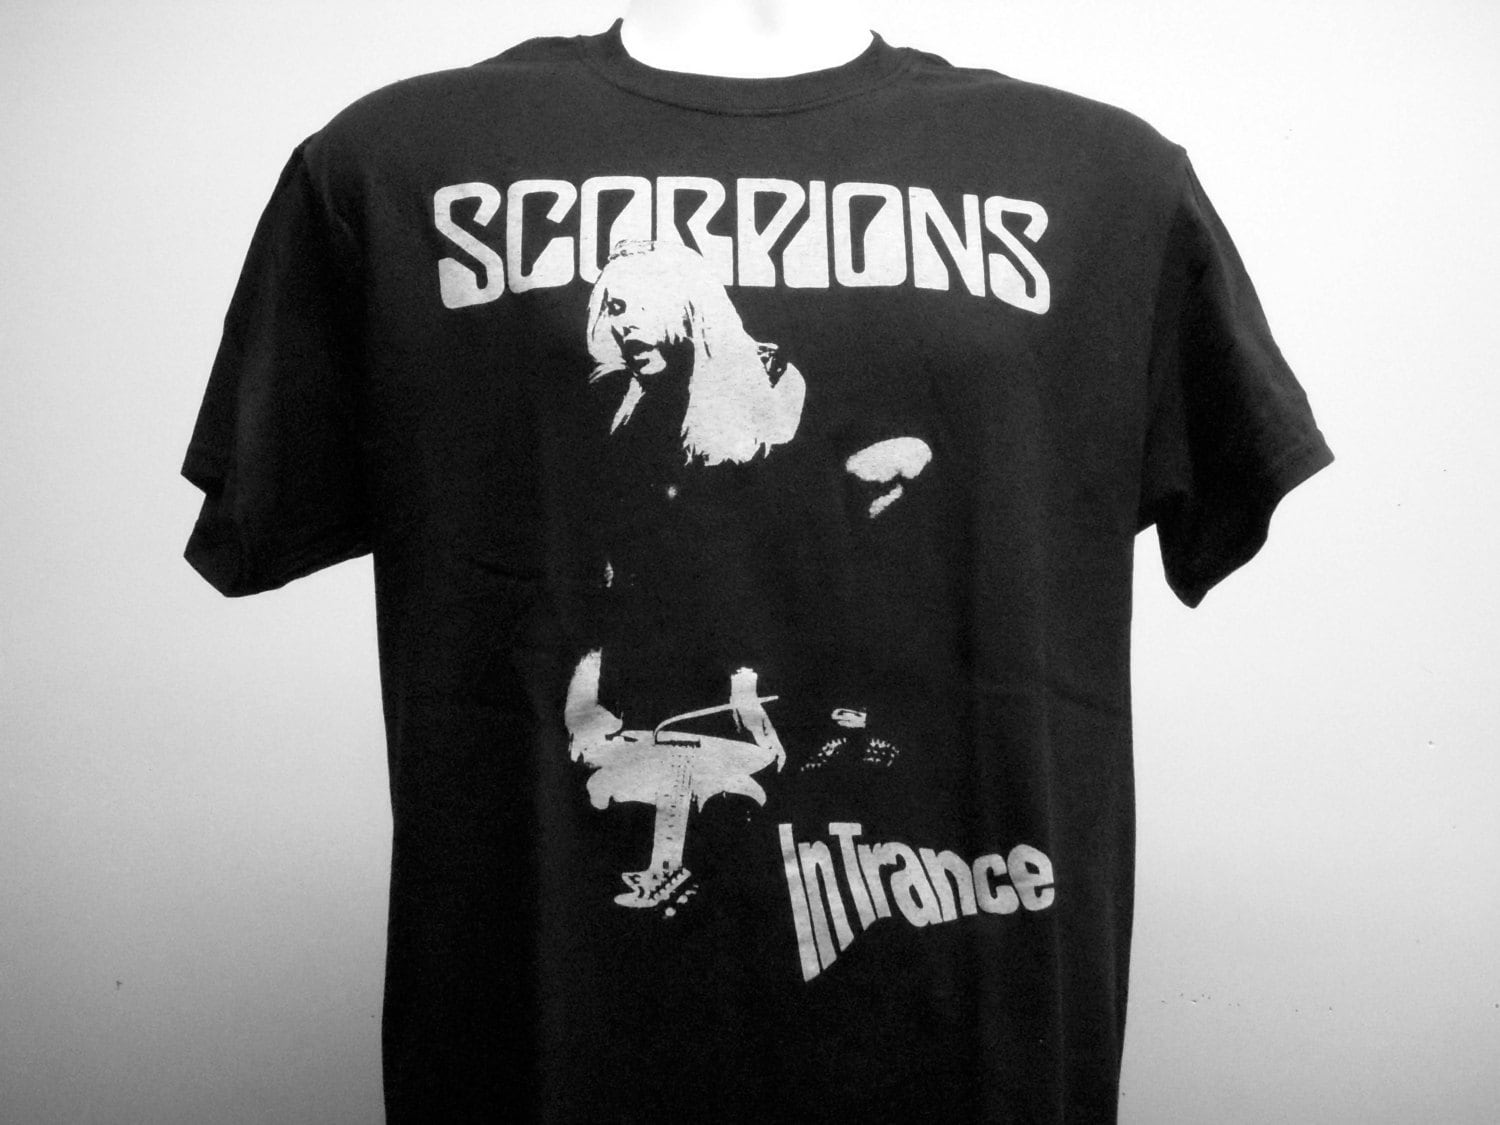 L XL SCORPIONS T-Shirt "In Trance"  Official/Licensed  S 2XL  NEW M 